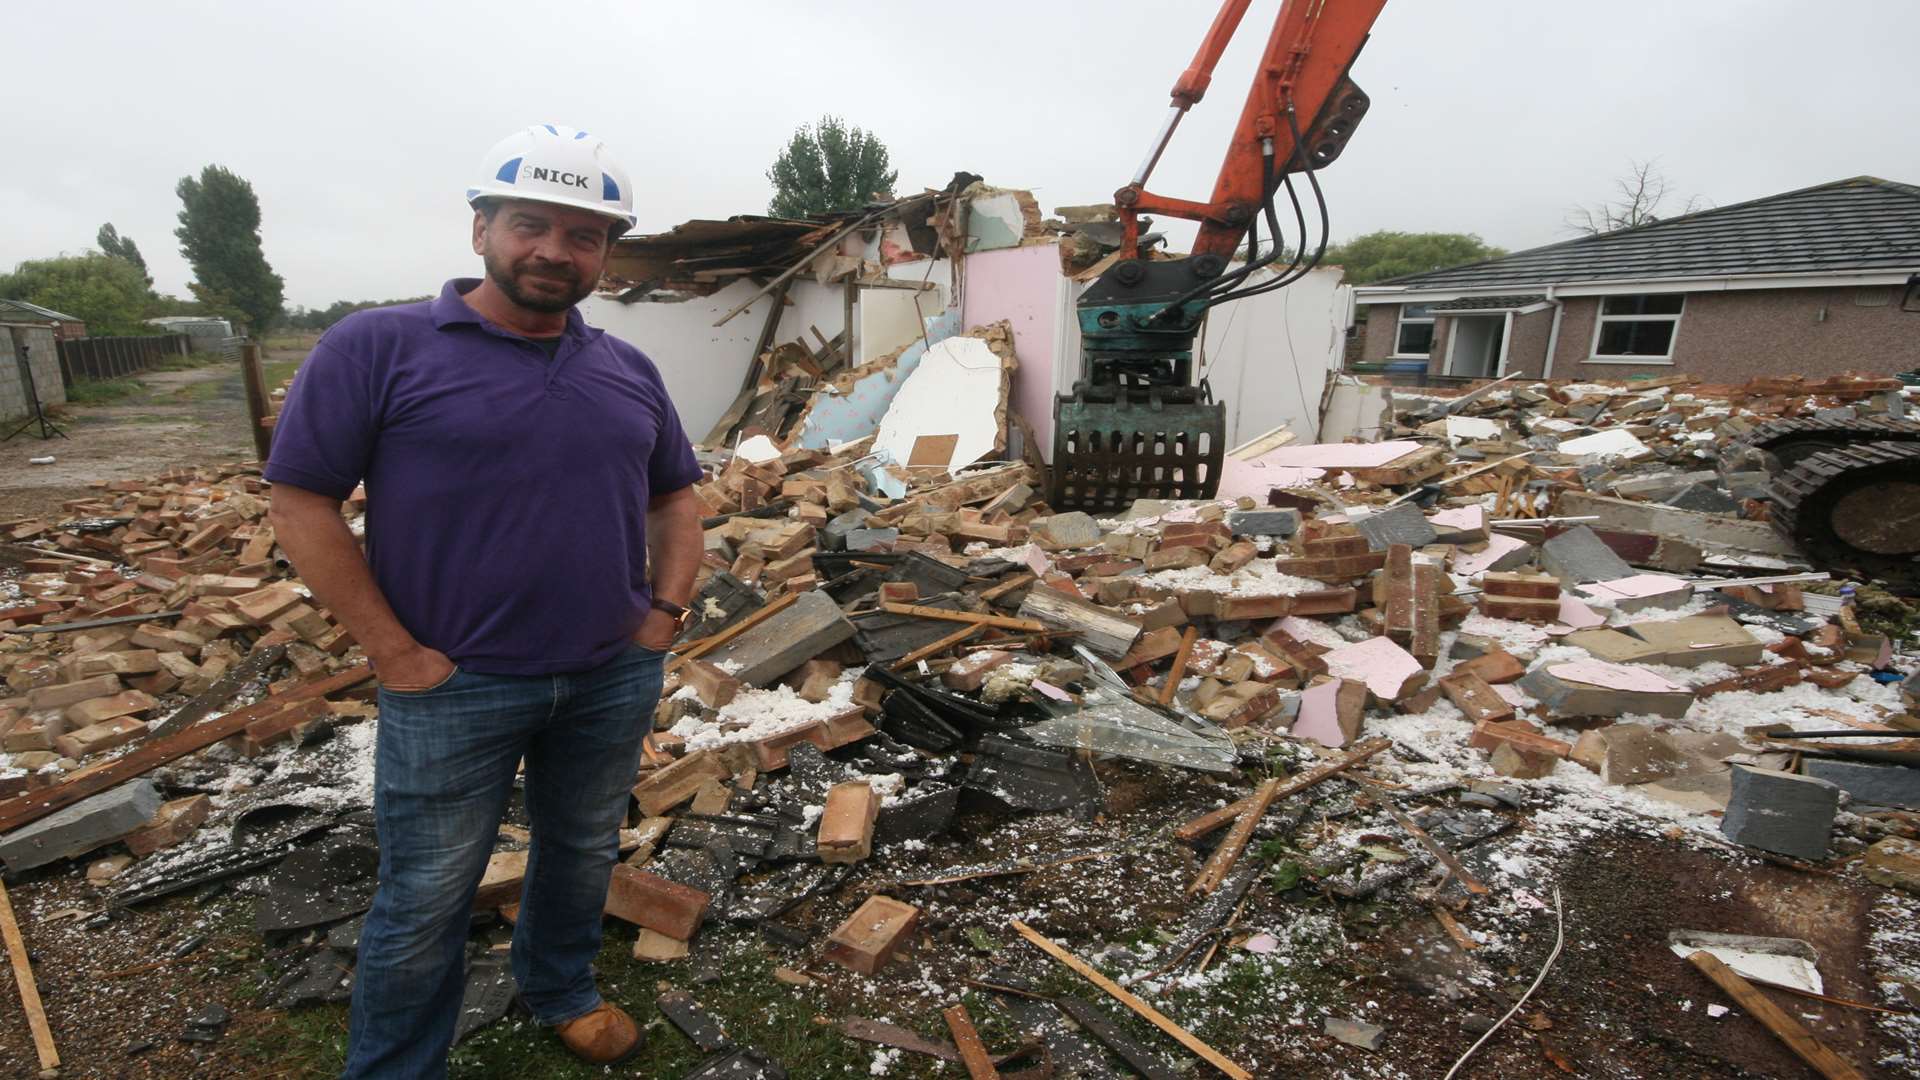 Watch it come down: DIY SOS presenter Nick Knowles amid the rubble of the original bungalow